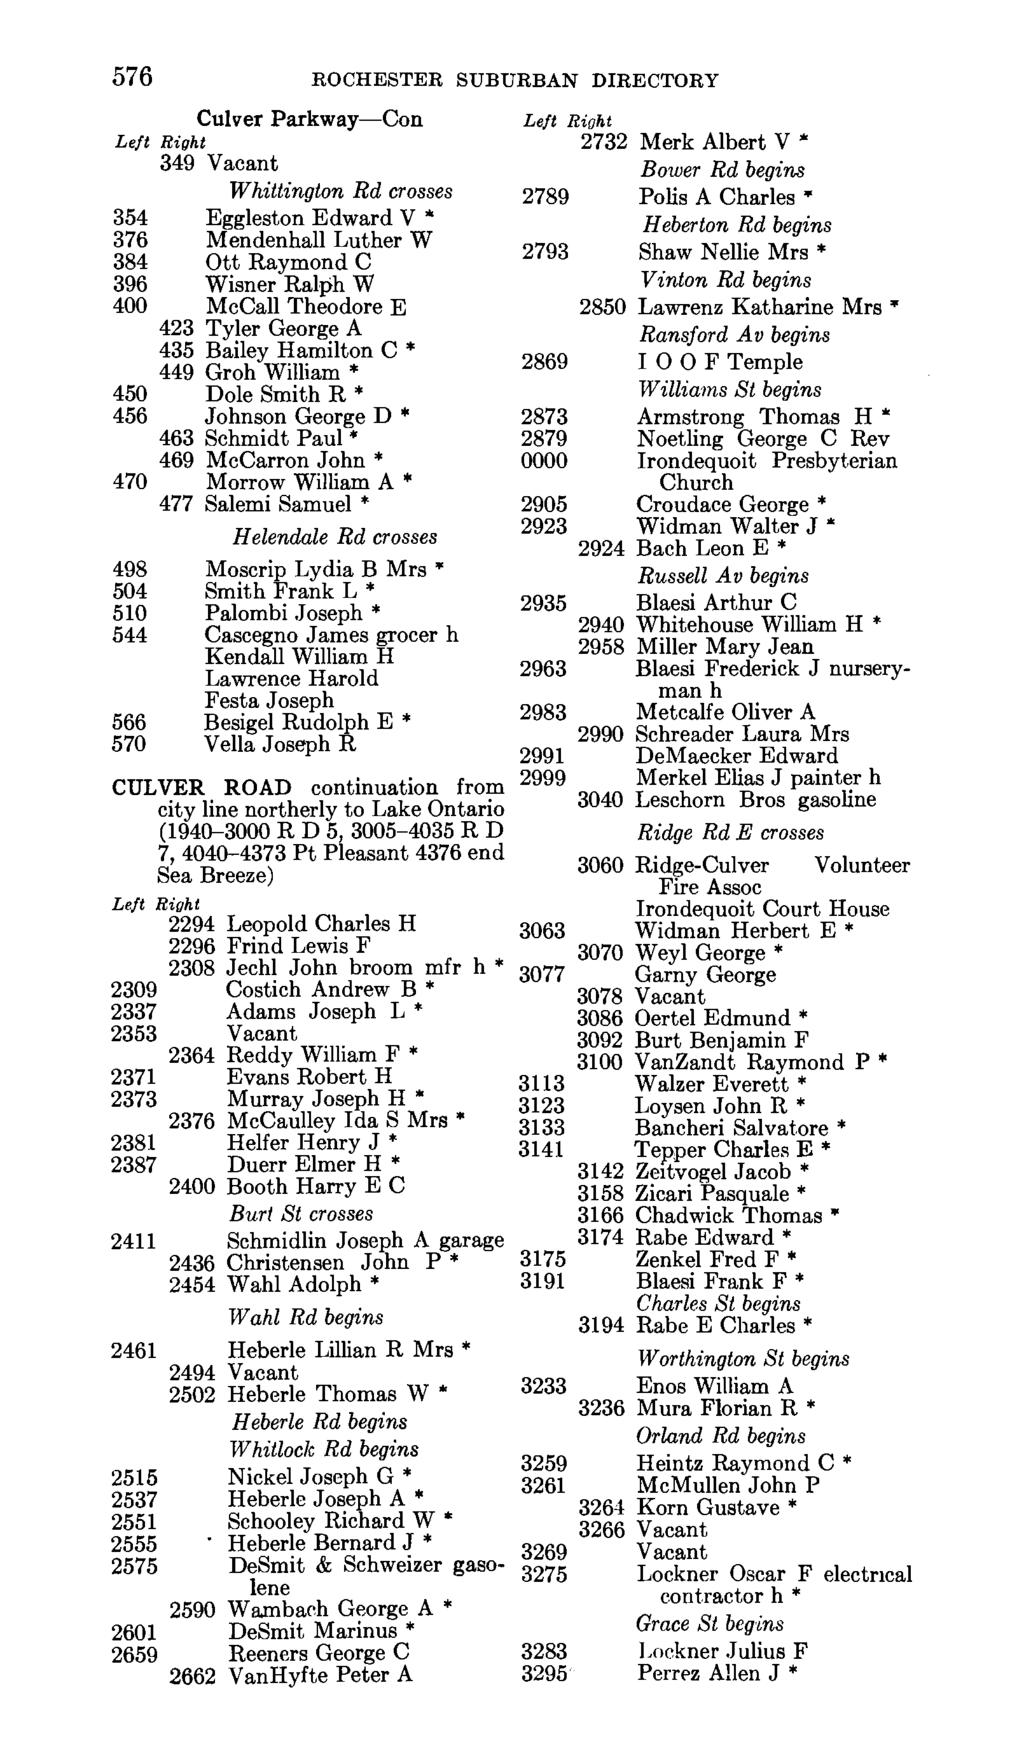 ' Central Library of Rochester and Monroe County Miscellaneous Directories 576 ROCHESTER SUBURBAN DIRECTORY Culver Parkway 349 Vacant Con Whittington Rd crosses 354 Eggleston Edward V * 376